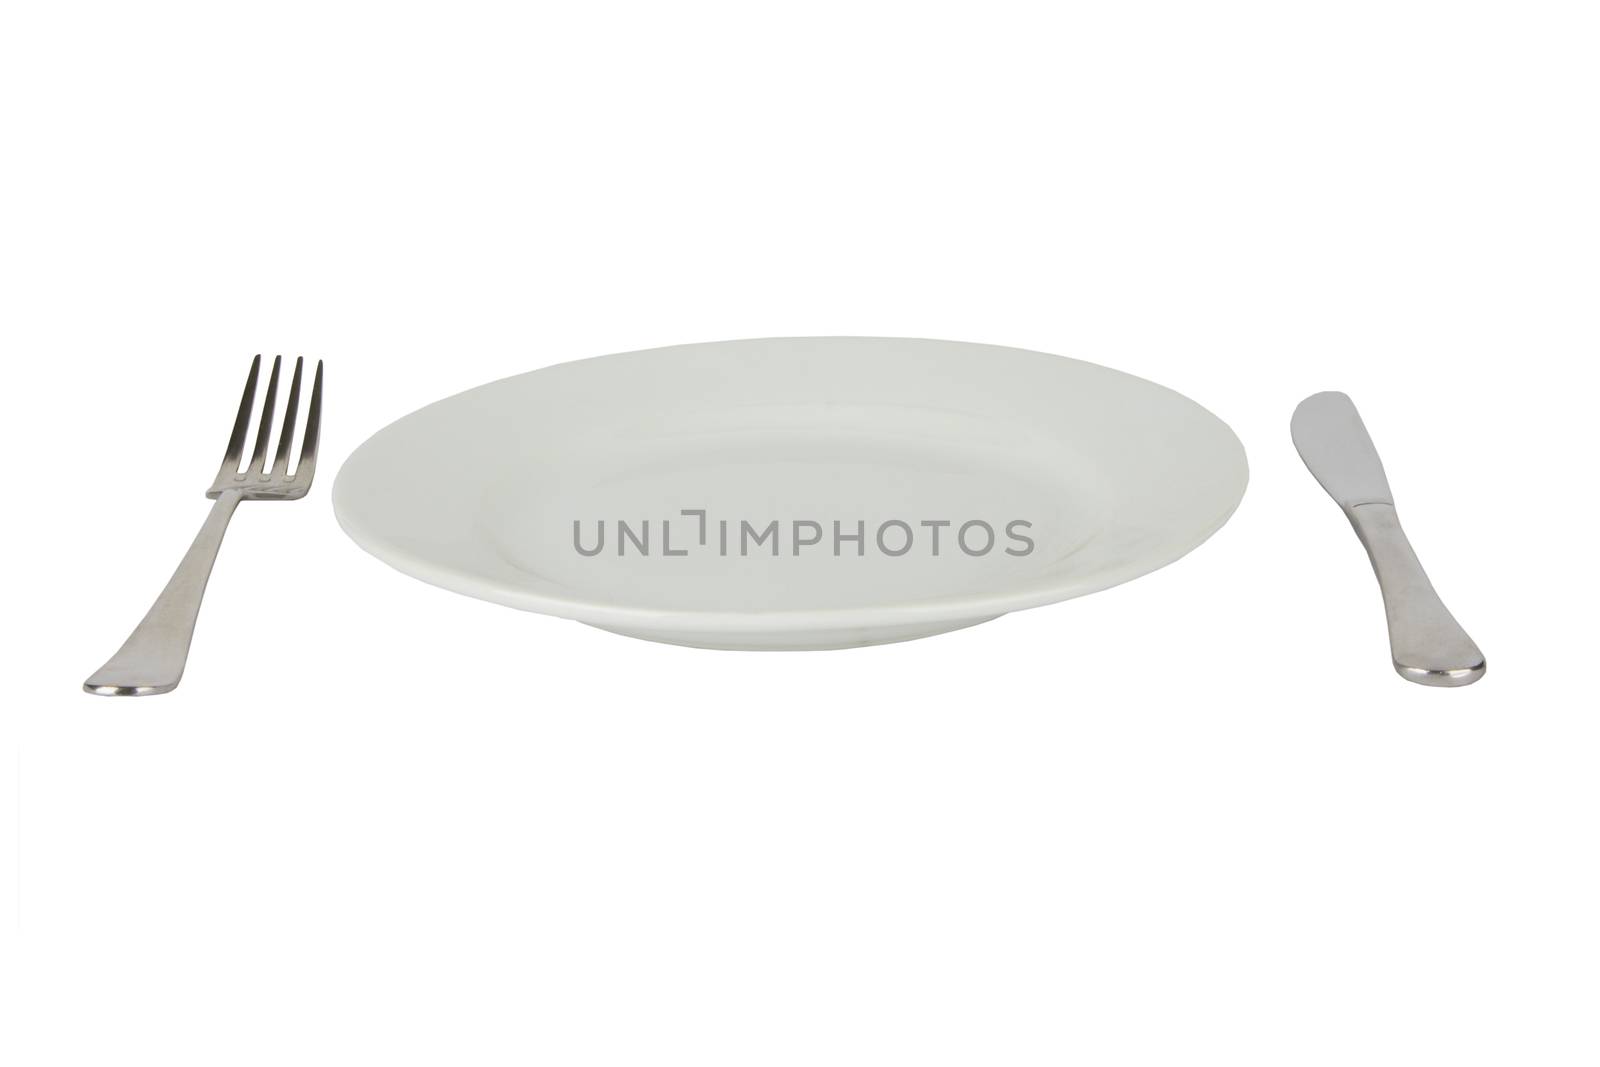 Place setting with high-gloss plate, knife & fork. Isolated on white. 